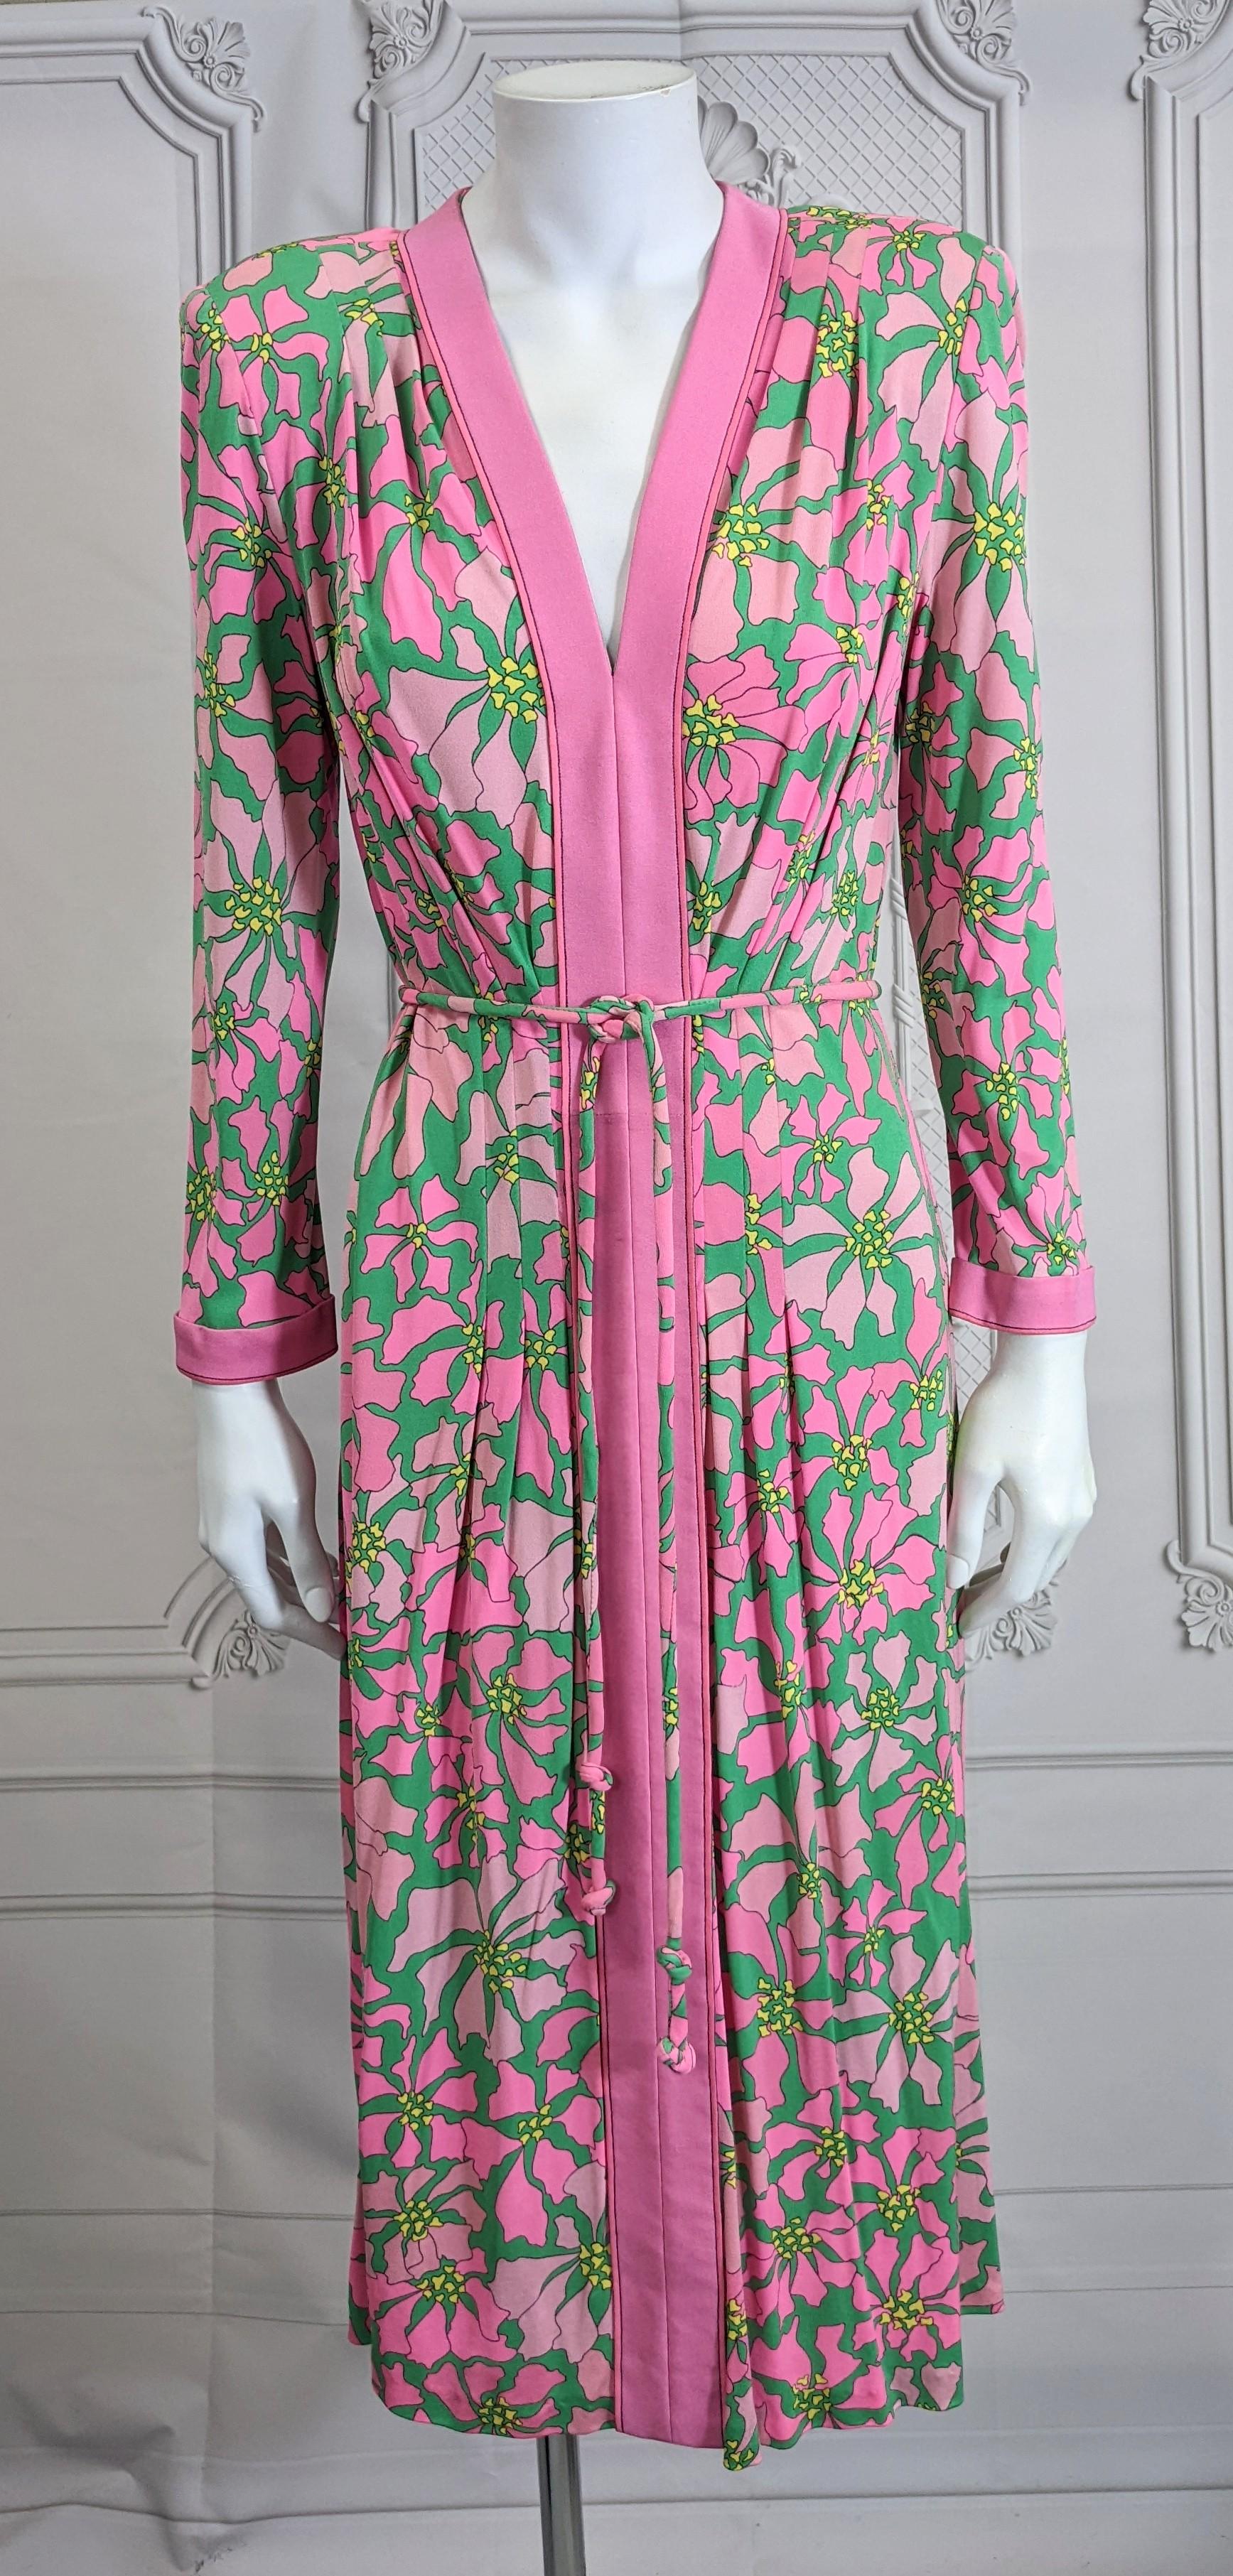 Elegant Bessi Silk Jersey Floral Print Dress with a poinsettia print in vibrant pink and green tones. Easy back zip entry with placed print and self fabric tube belt. Slight shoulder pads with tucks. Tucks also placed at waist for shaping.  
1970's